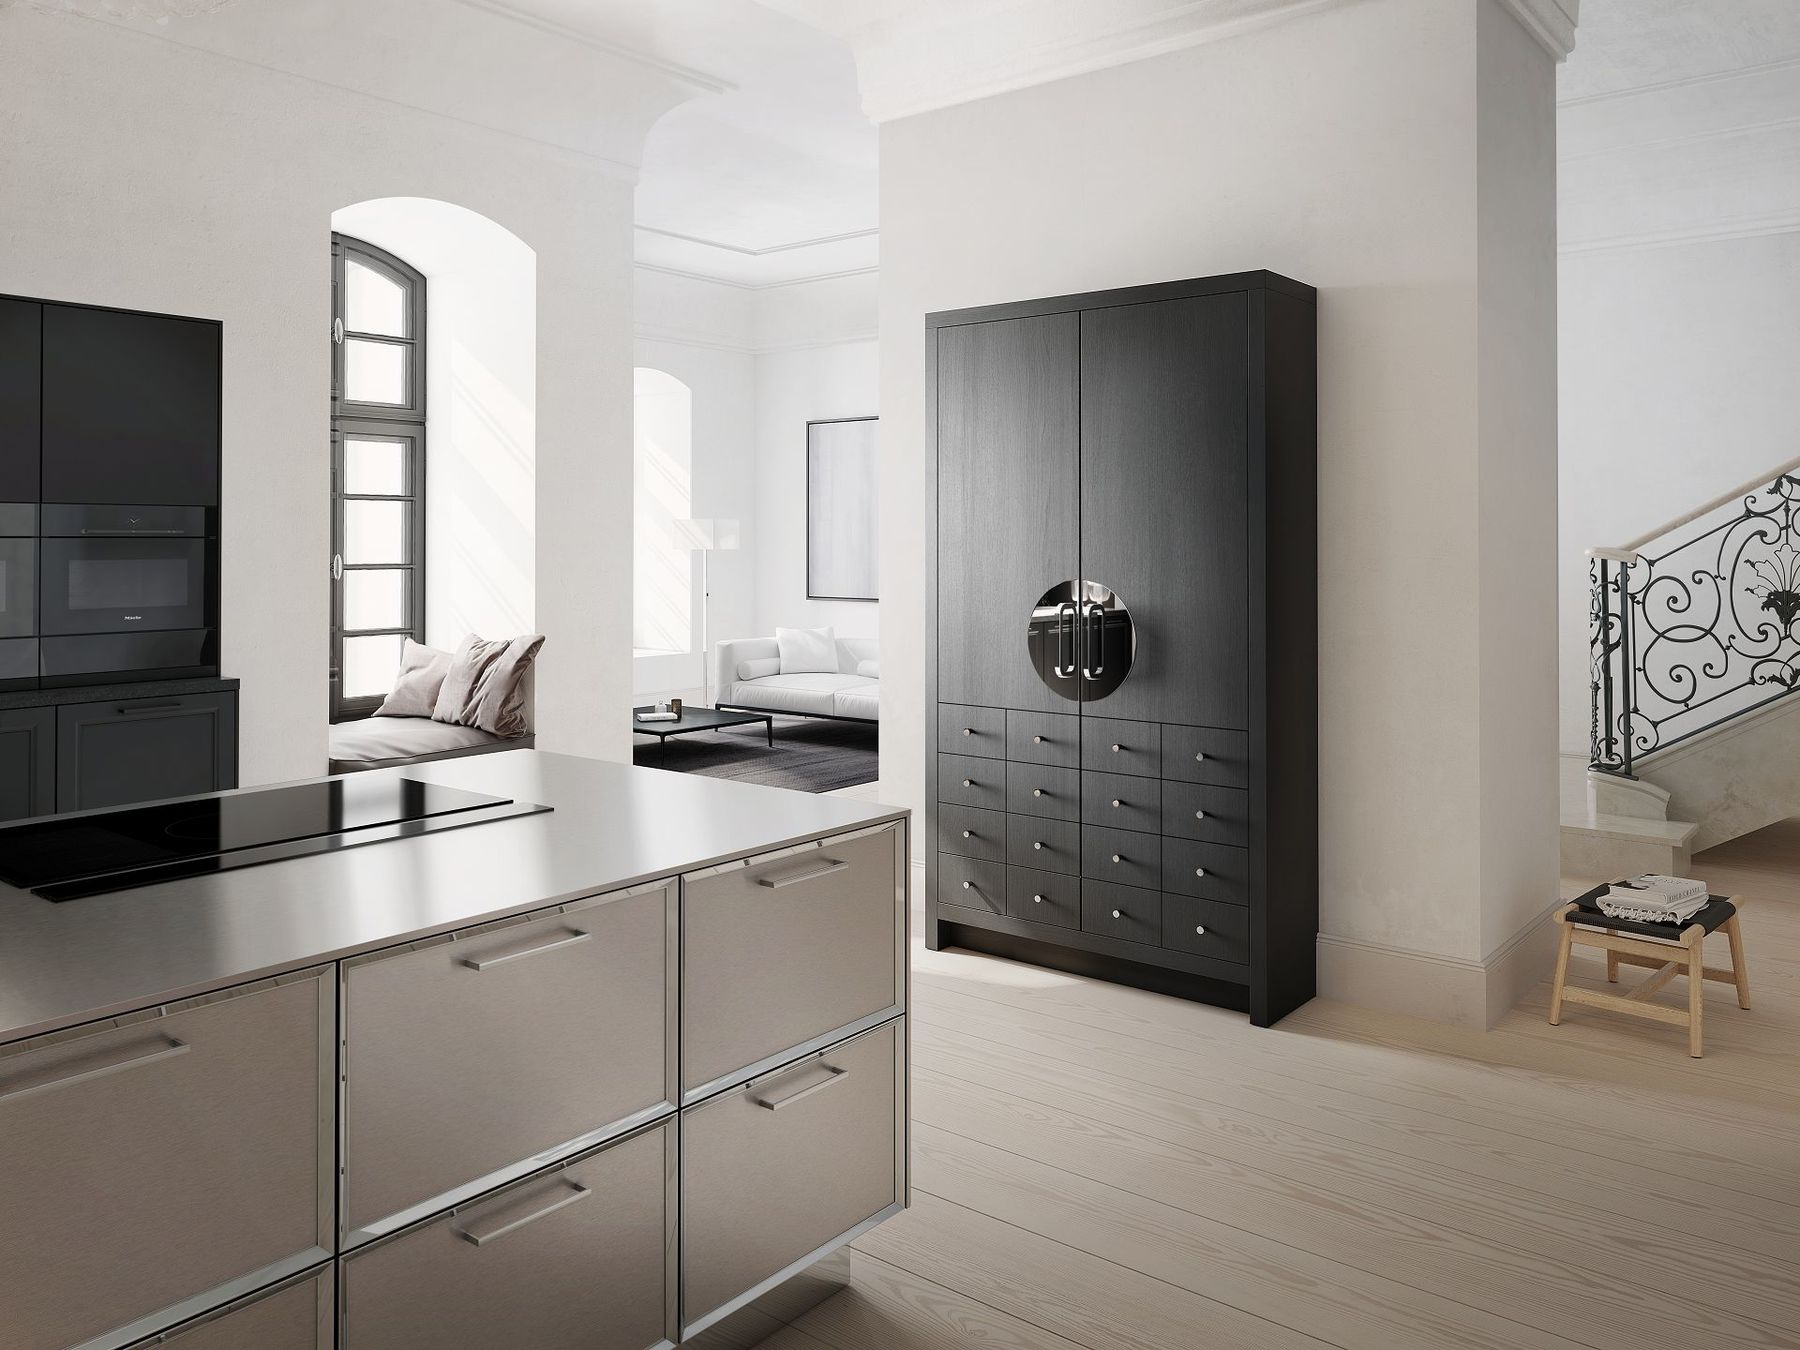 Chinese wedding cabinet from the SieMatic Classic collection in black matte oak with nickel